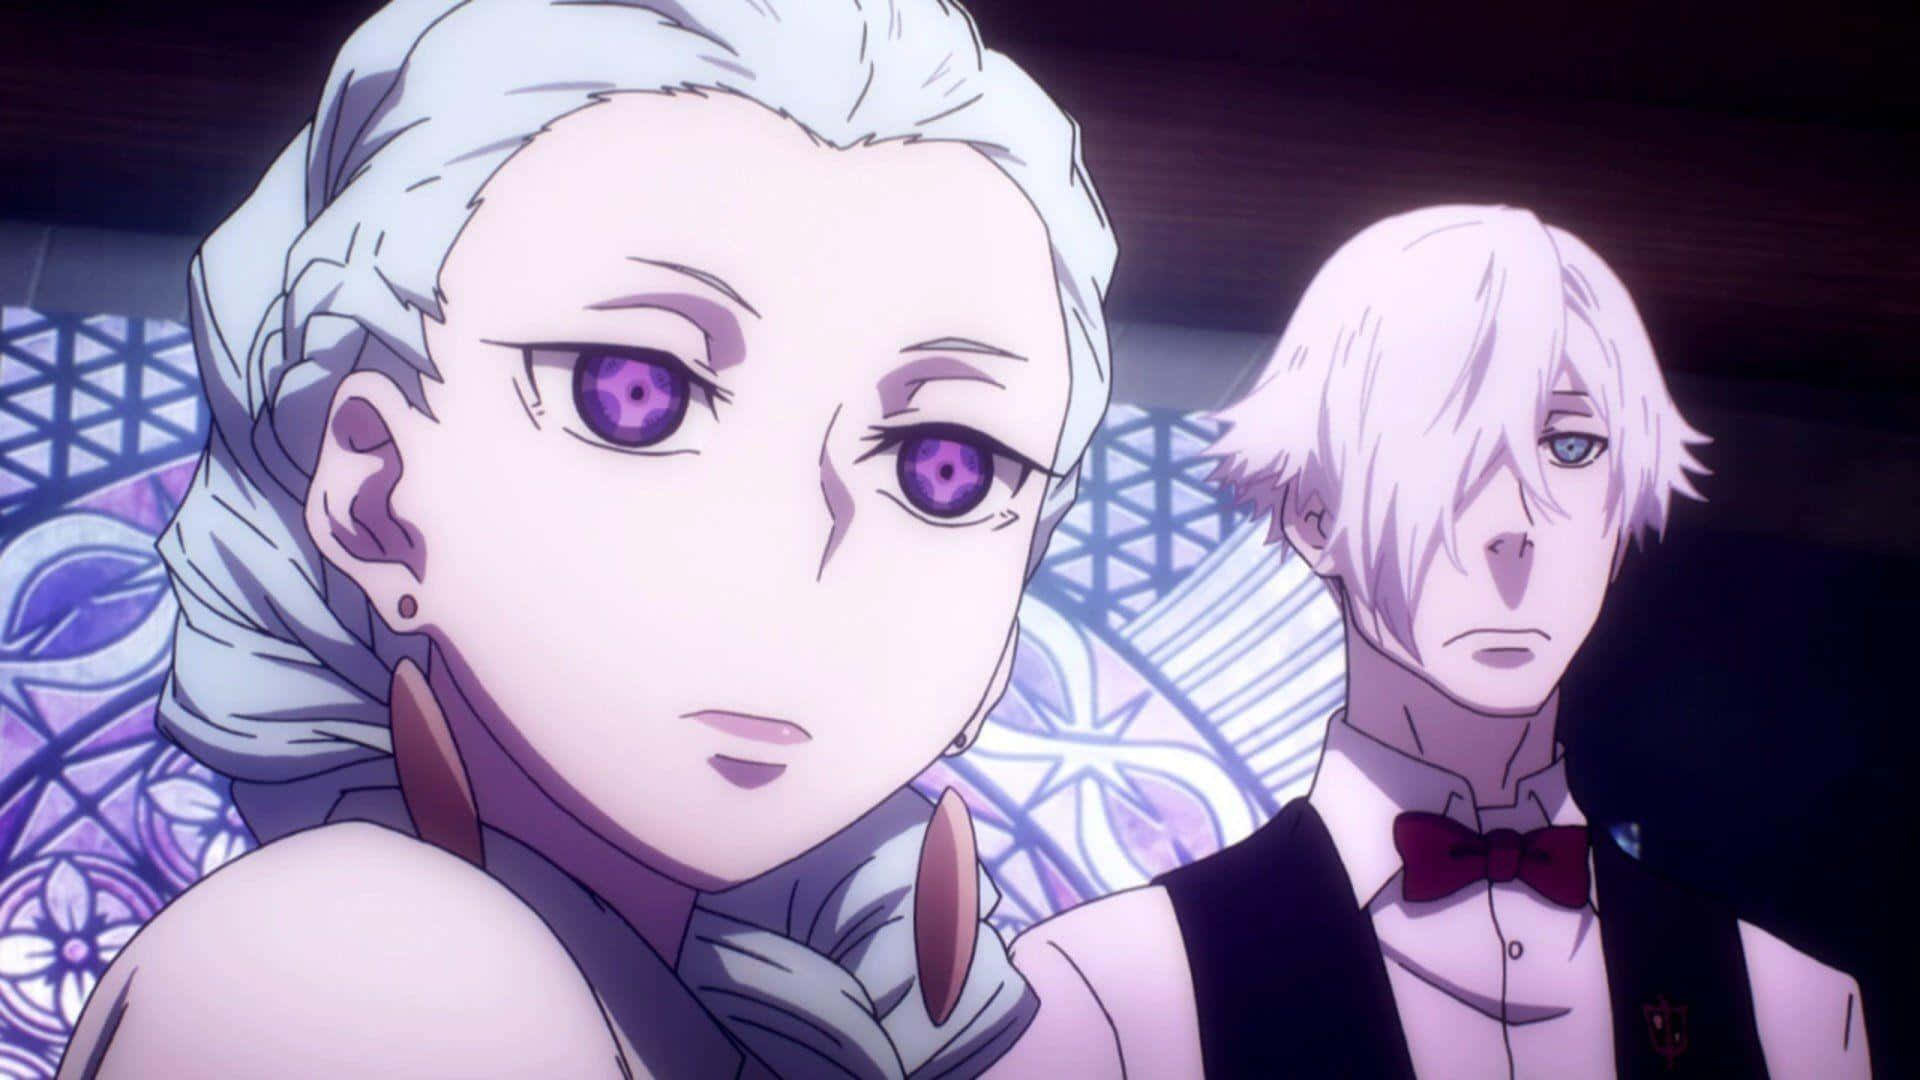 Top 10 Best Anime Boys With White Hair Ranked